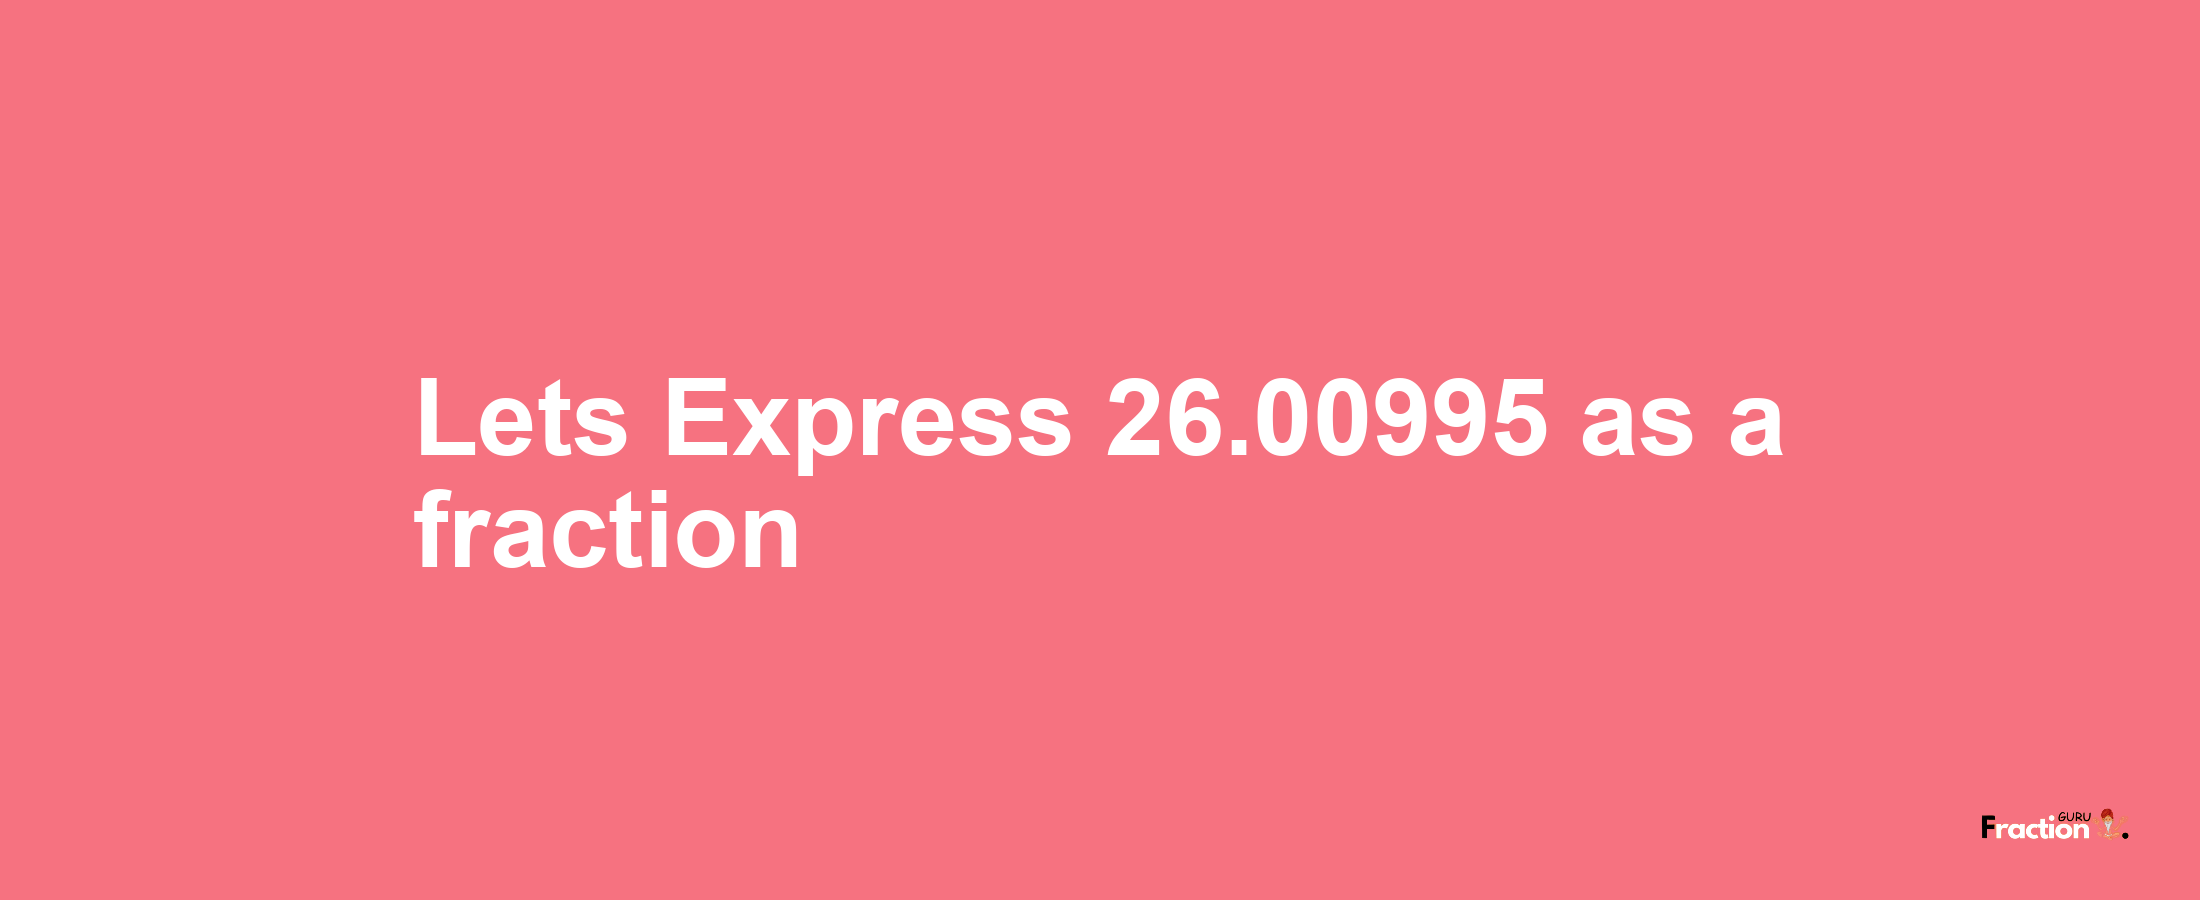 Lets Express 26.00995 as afraction